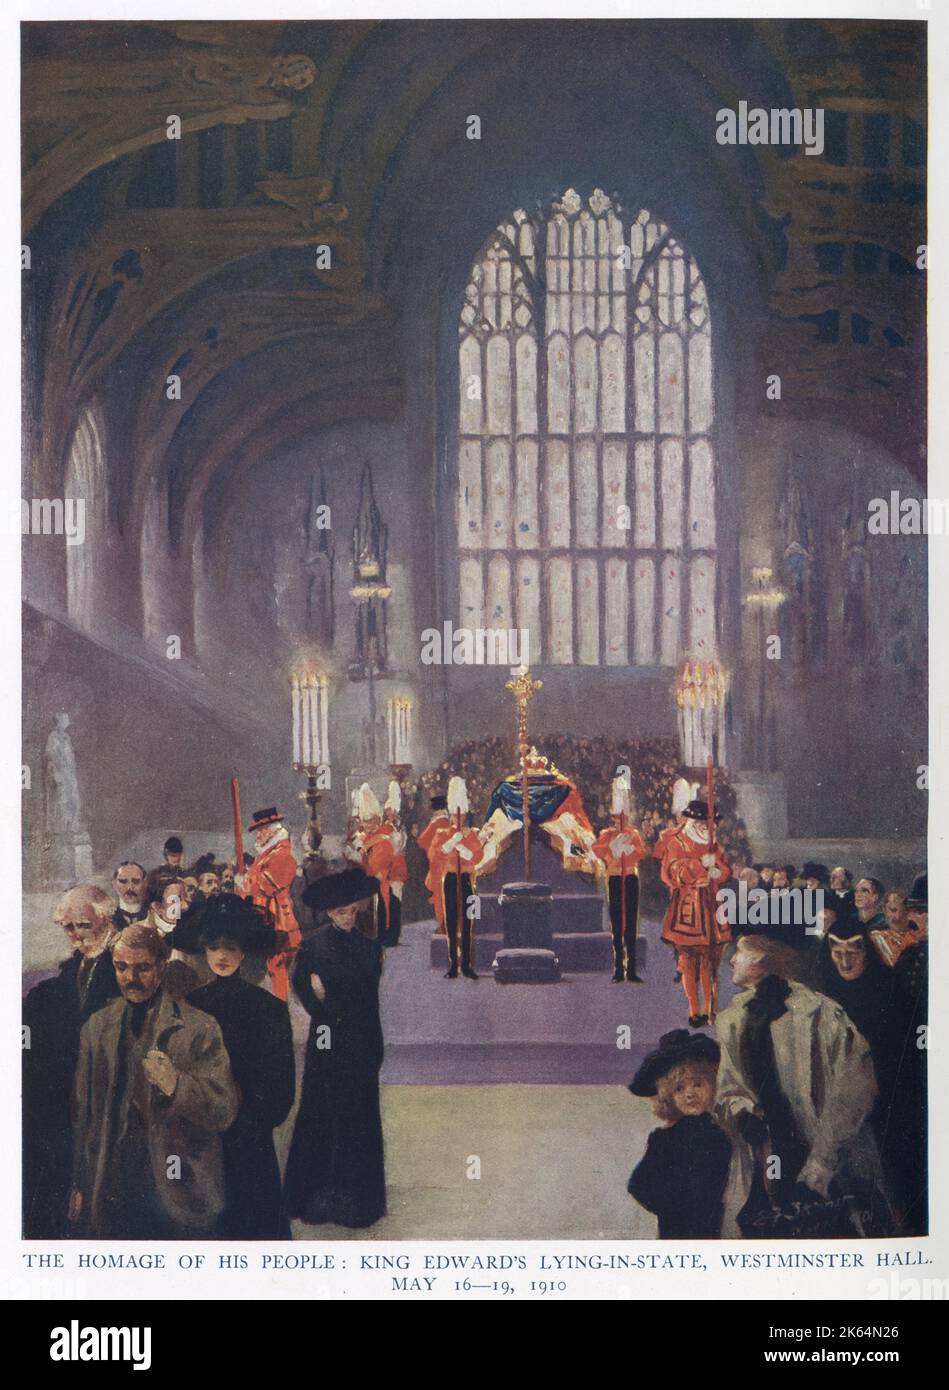 The homage of his people: King Edward VII's lying-in-state at Westminster Hall from May 16th to the 19th, 1910. Stock Photo